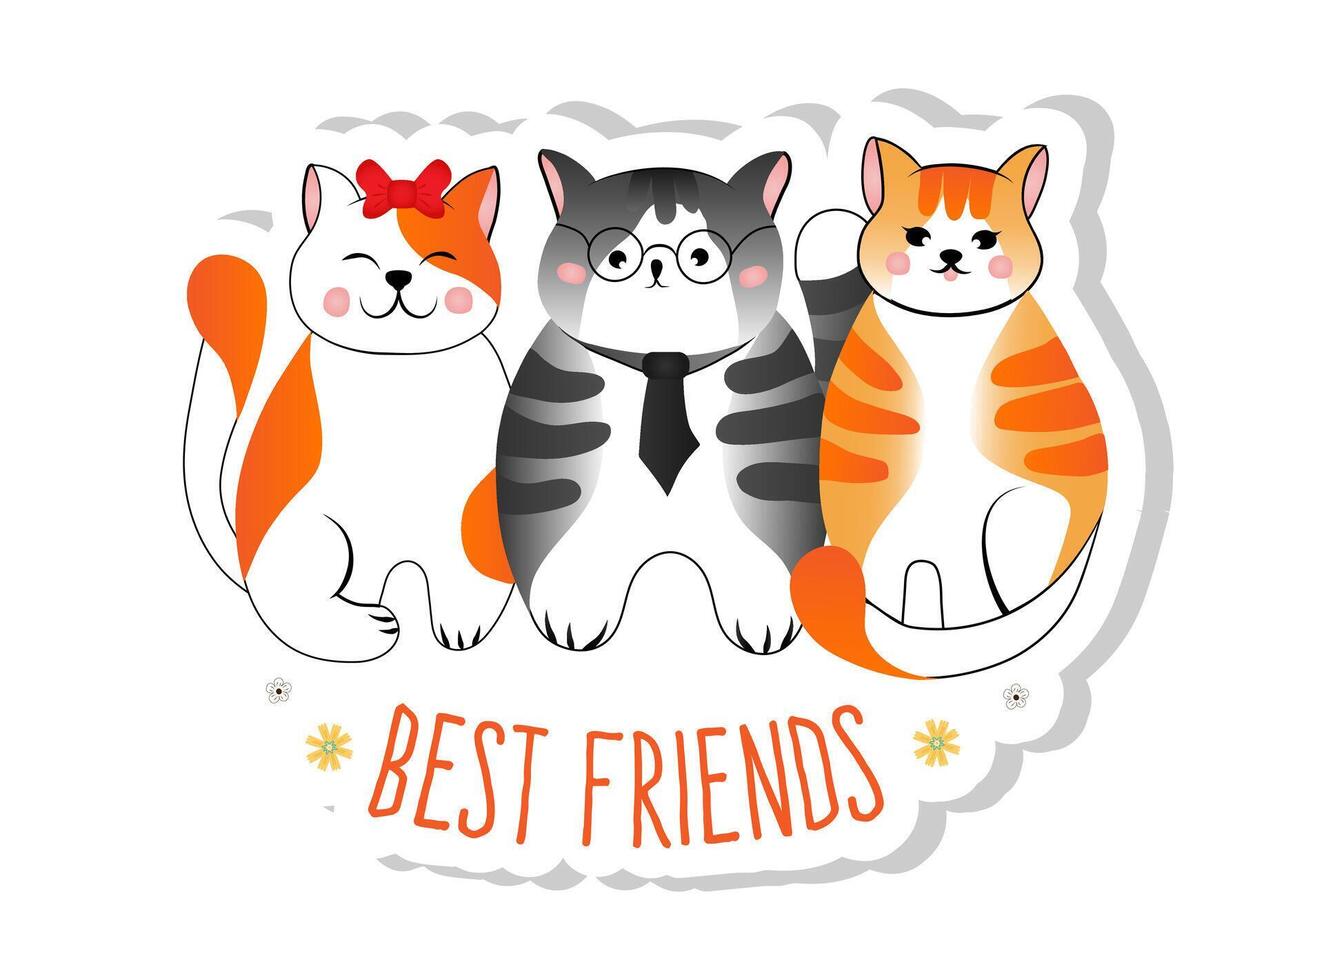 Sticker cute gray striped cat and red cats isolated on white background. Vector illustration for children Best friends.